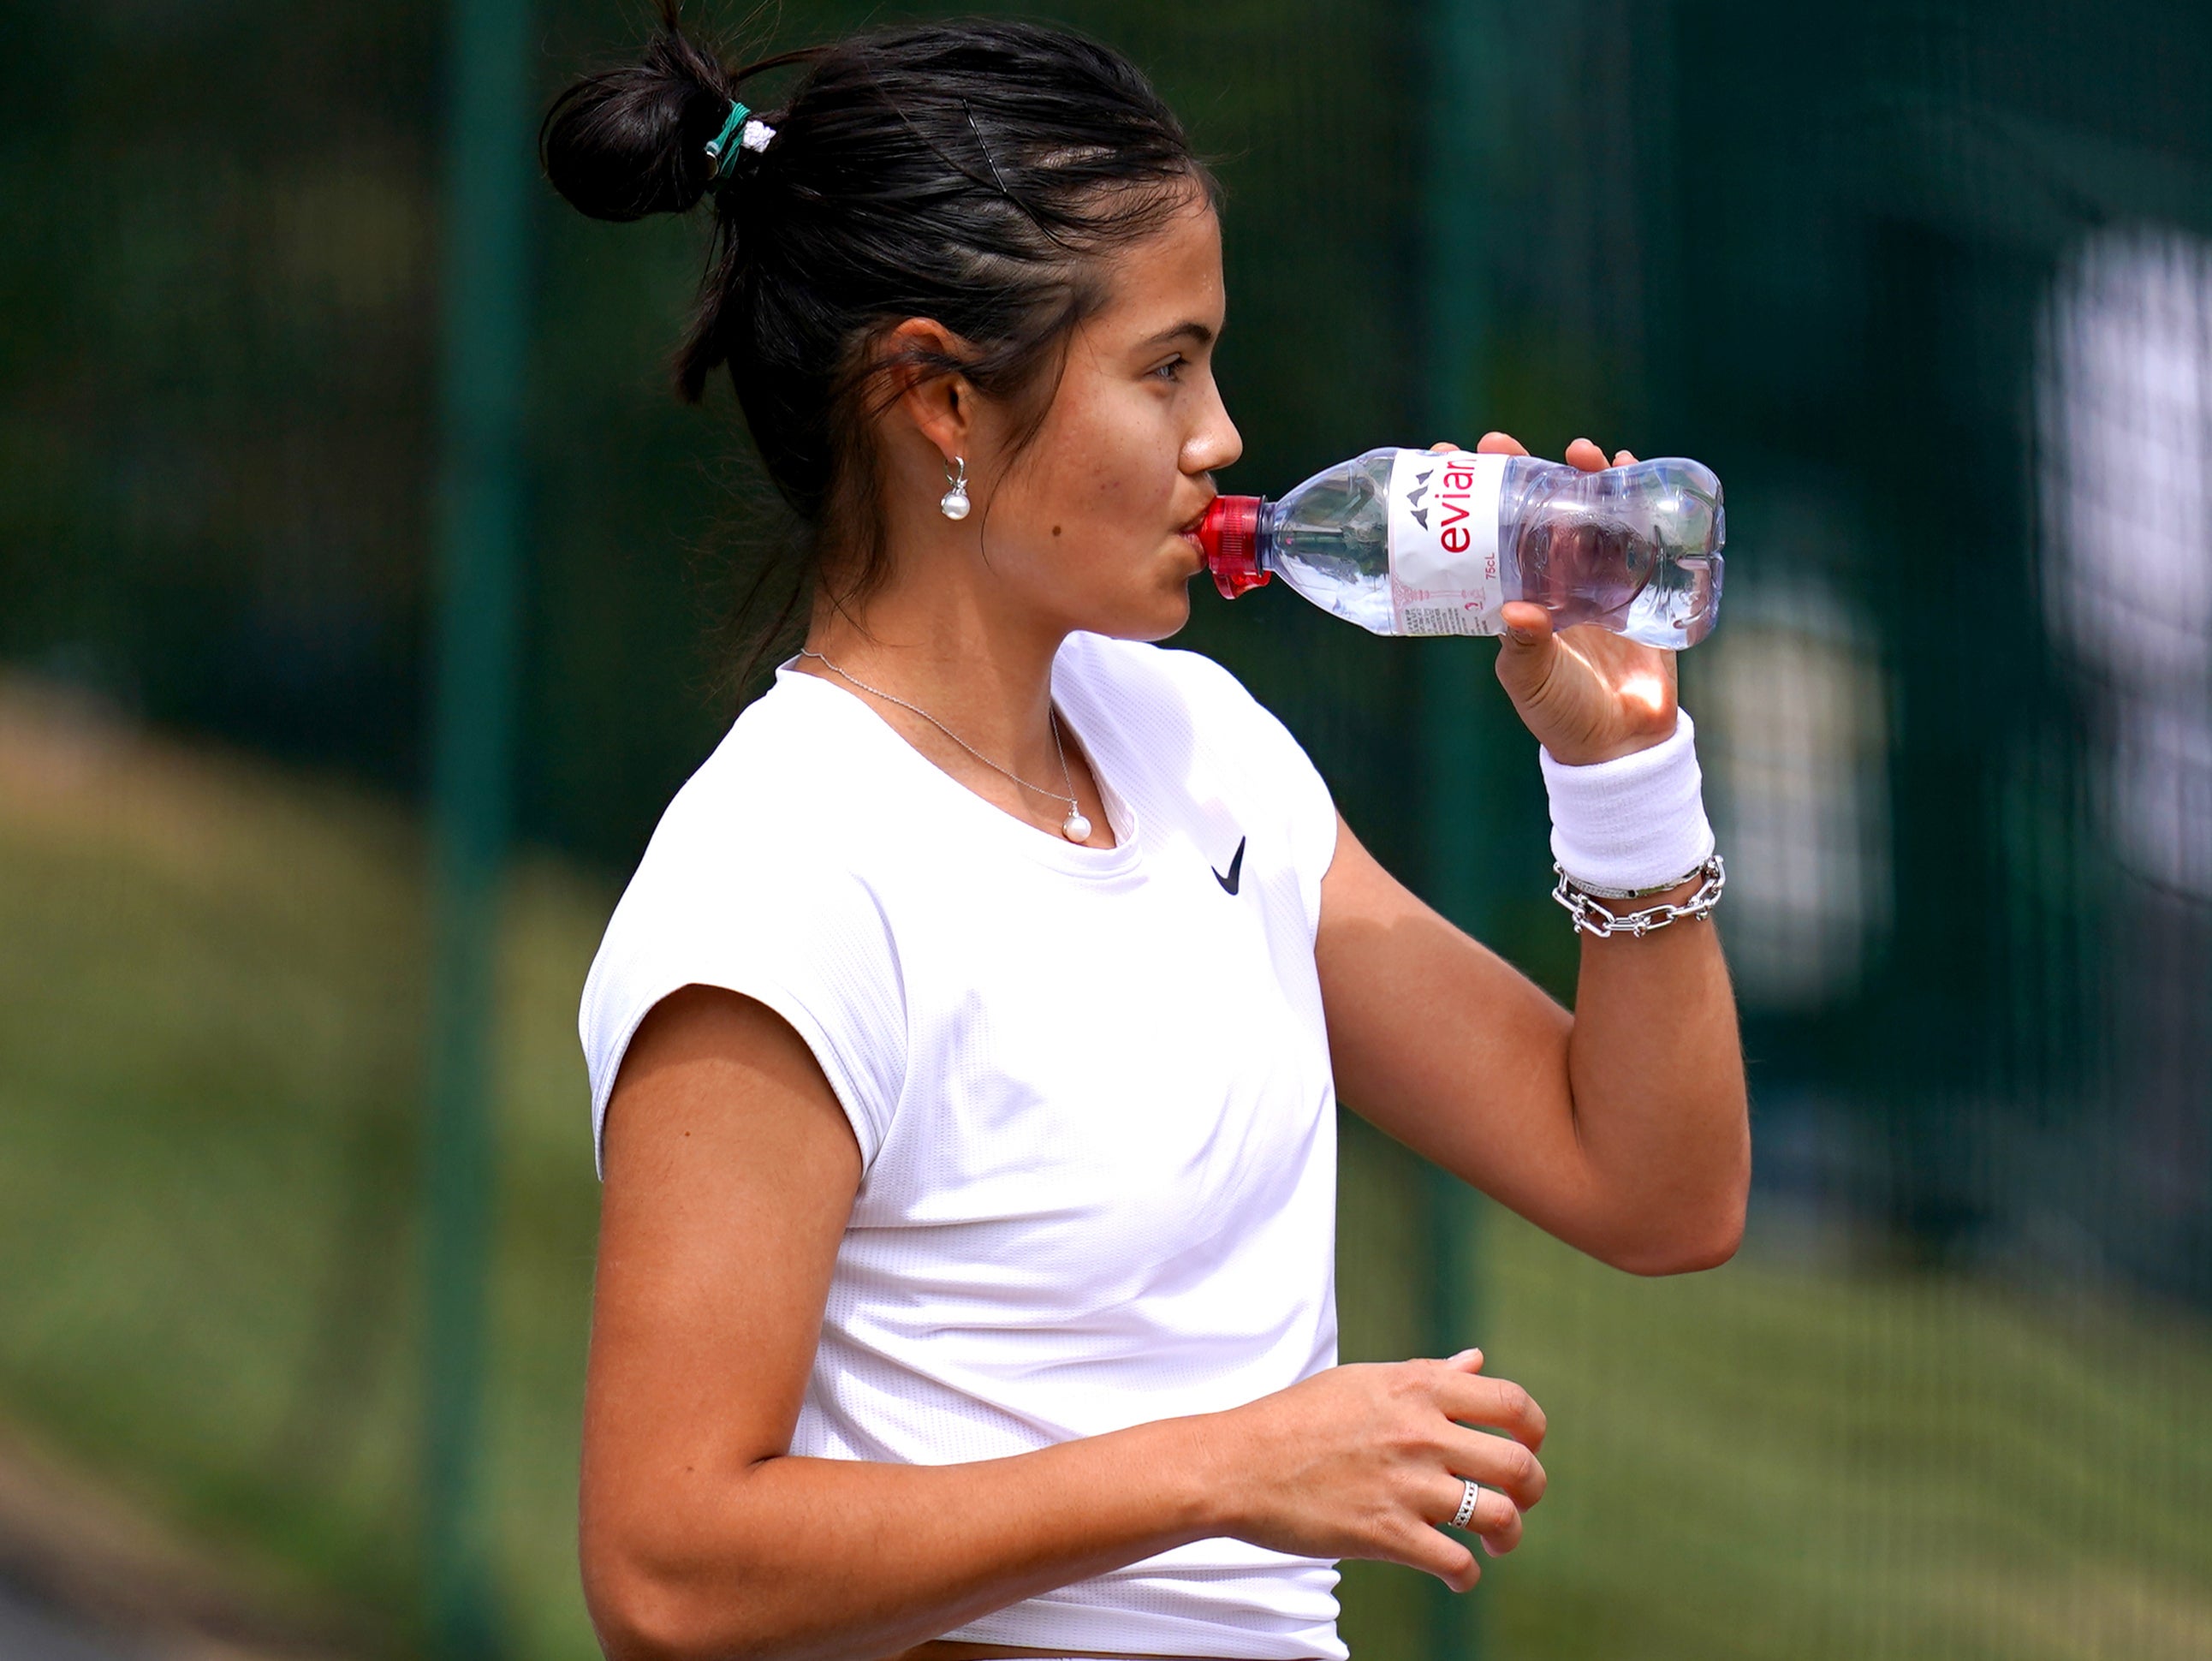 Emma Raducanu takes a drinks break during a practice session ahead of the 2022 Wimbledon Championship